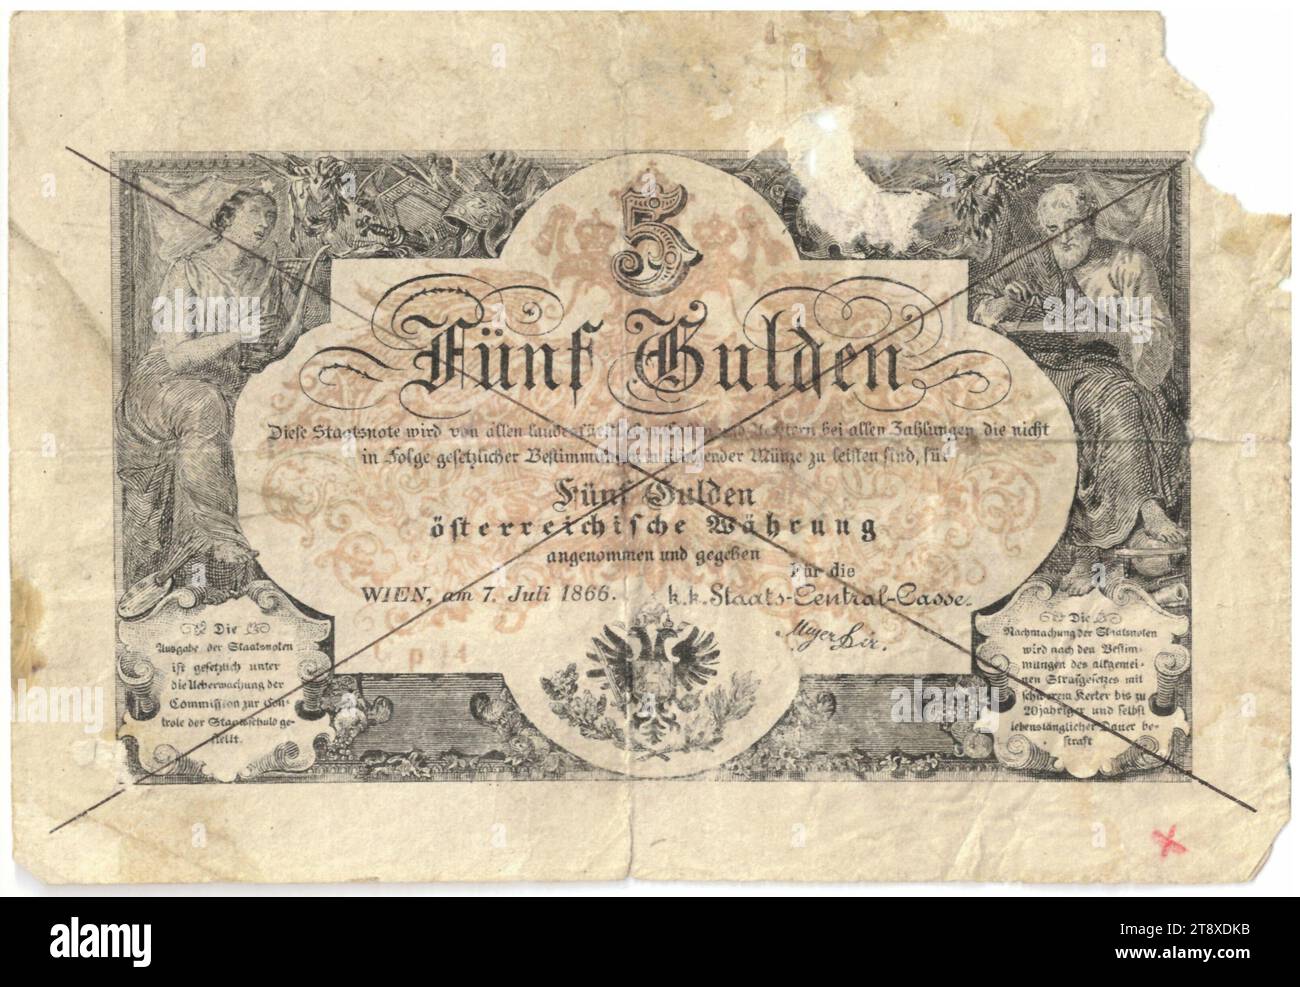 Staatsnote (Fälschung), 5 Gulden, K. K. Staats-Central-Casse, mint authority, Date after 07.07.1866, paper, printing, width 135 mm, height 93 mm, Mint, Wien, Mint territory, Österreich, Kaiserreich (1804-1867), Finance, counterfeit, forgery, coat of arms (as symbol of the state, etc.), bank-note, money, The Vienna Collection Stock Photo